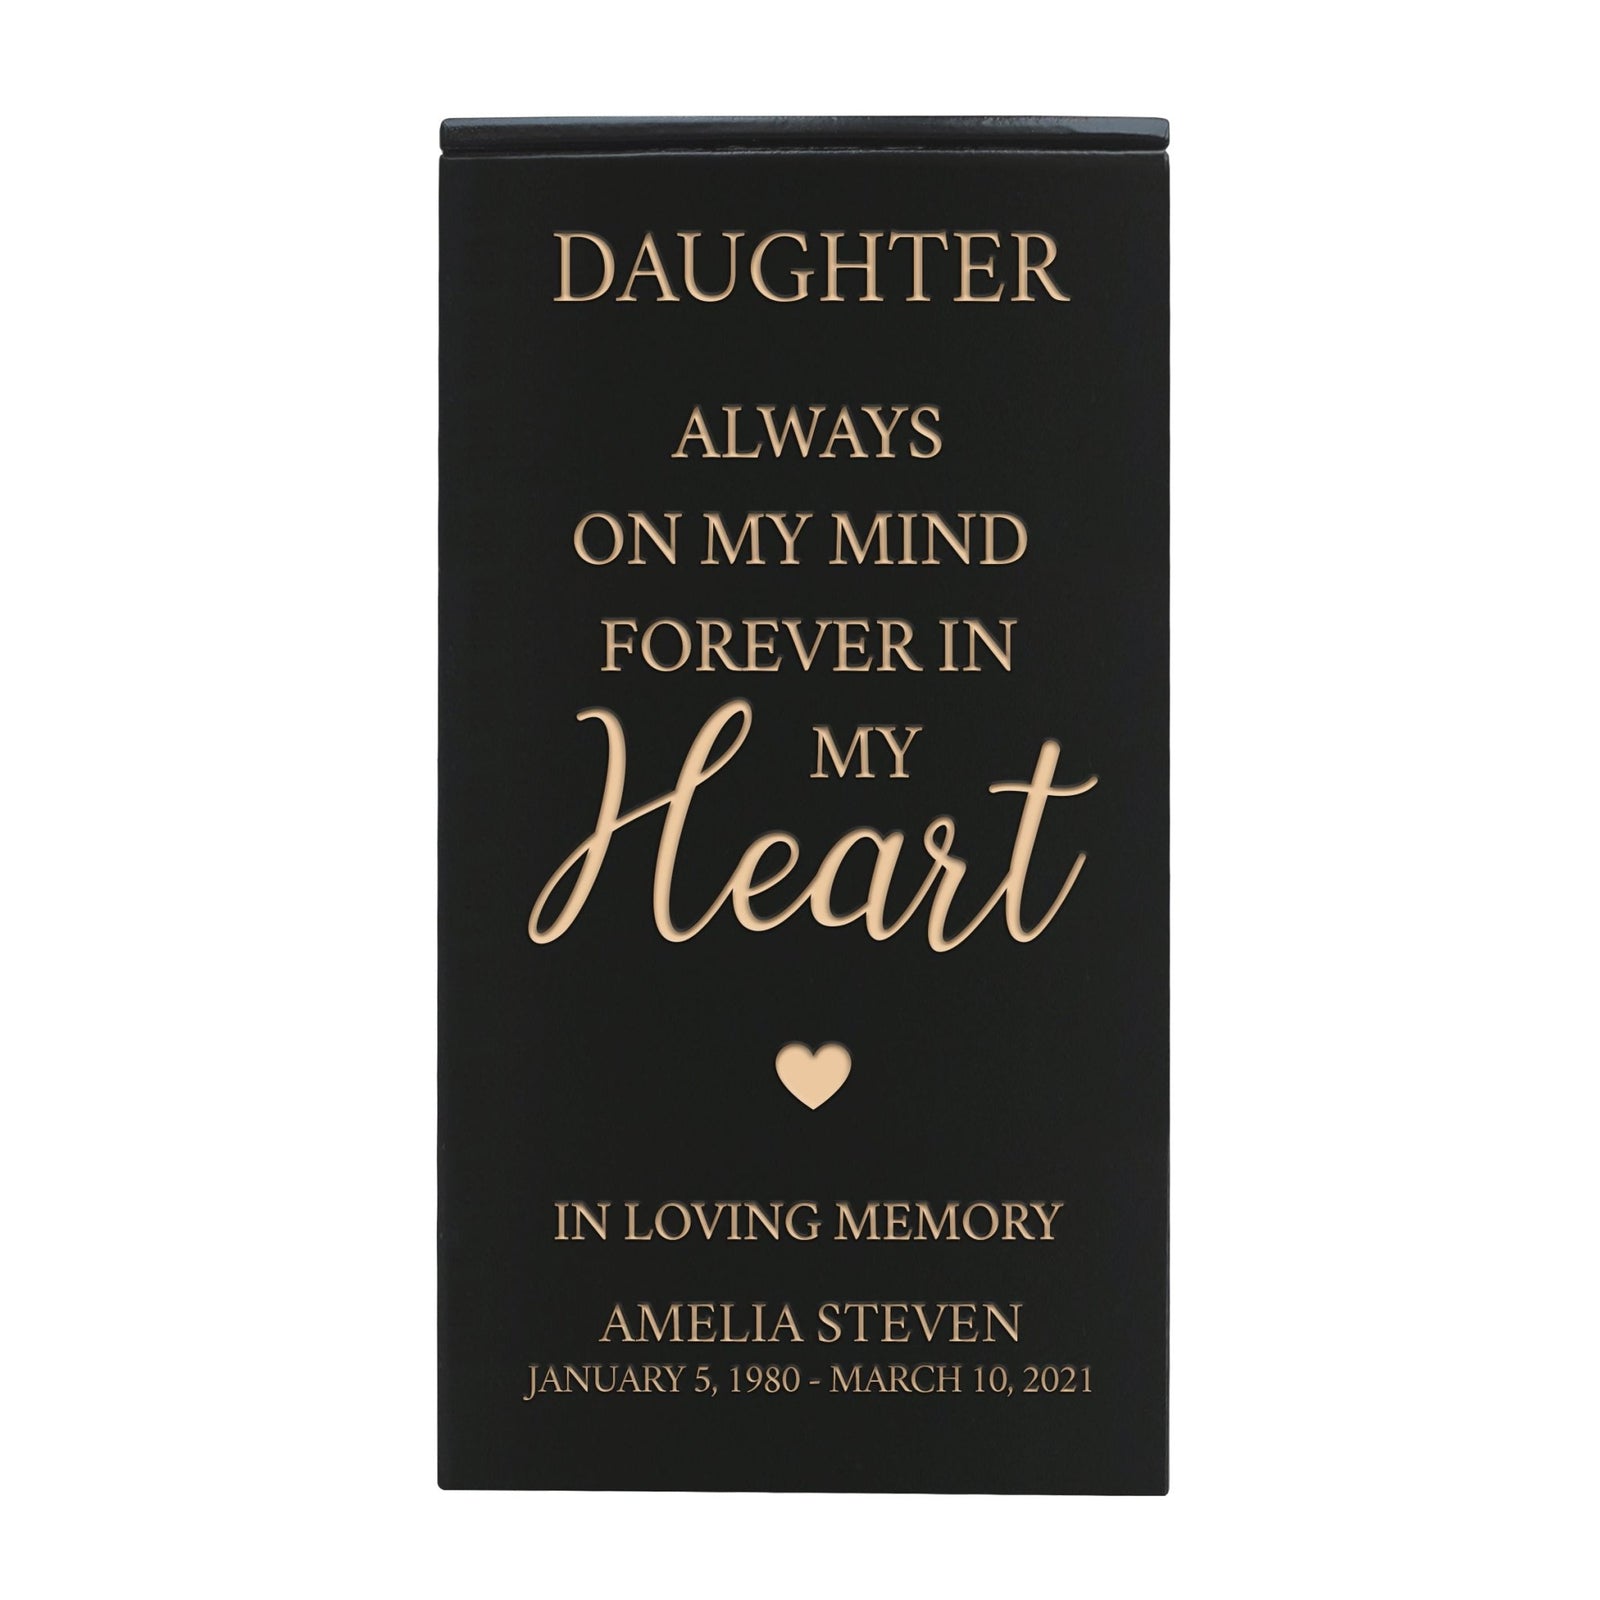 Custom Engraved Memorial Cremation Keepsake Urn Box holds 100 cu in of Ashes in - Daughter, Always On My Mind - LifeSong Milestones